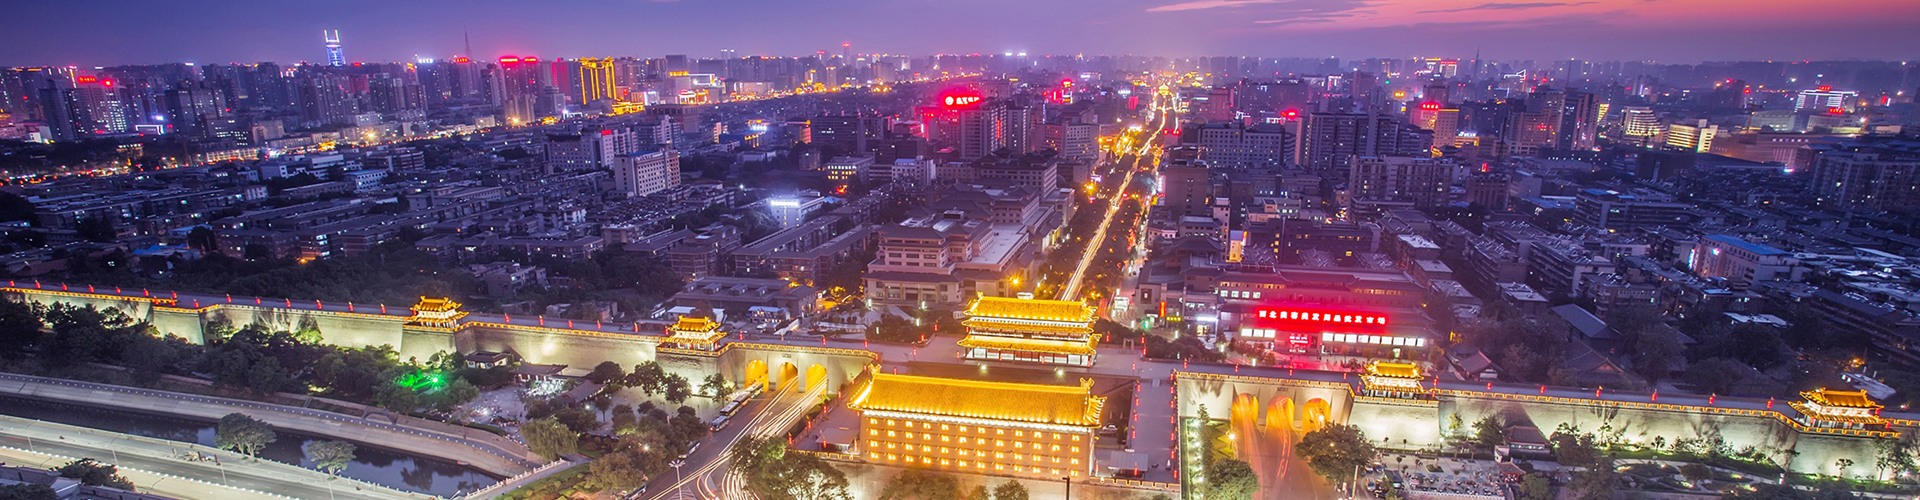 Xi'an, the Hub of Transport Network in Old and Modern China